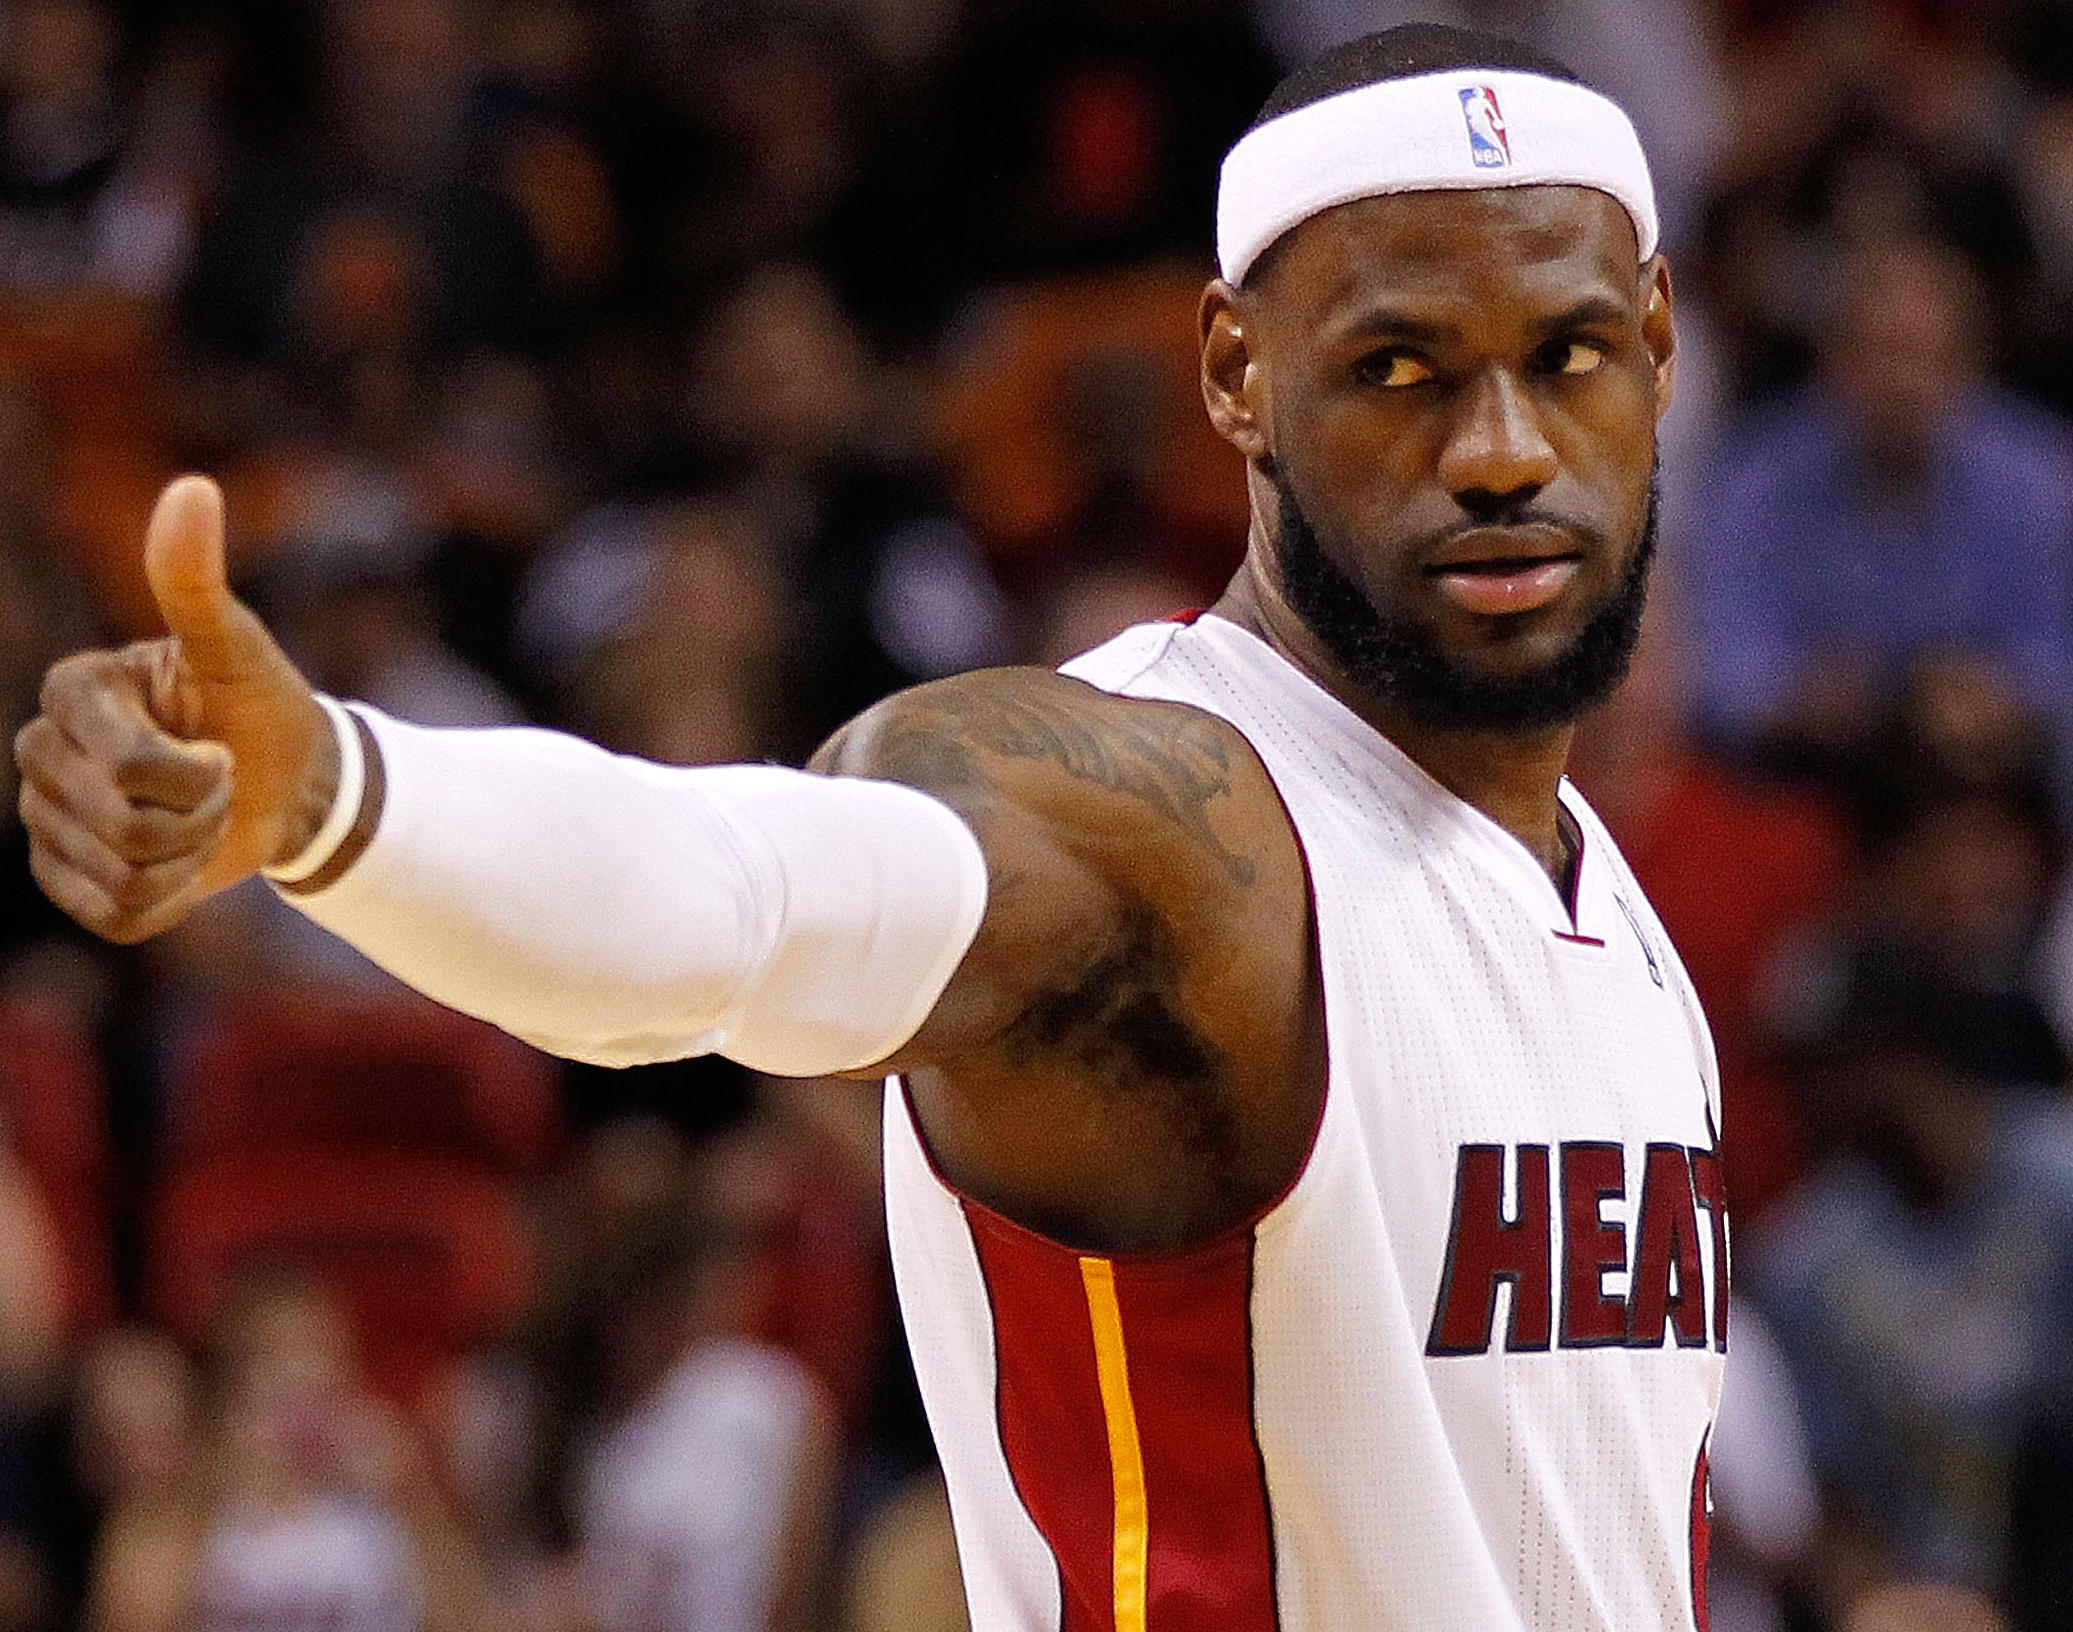 Report: LEBRON JAMES Linked to Miami Steroid Clinic According to.